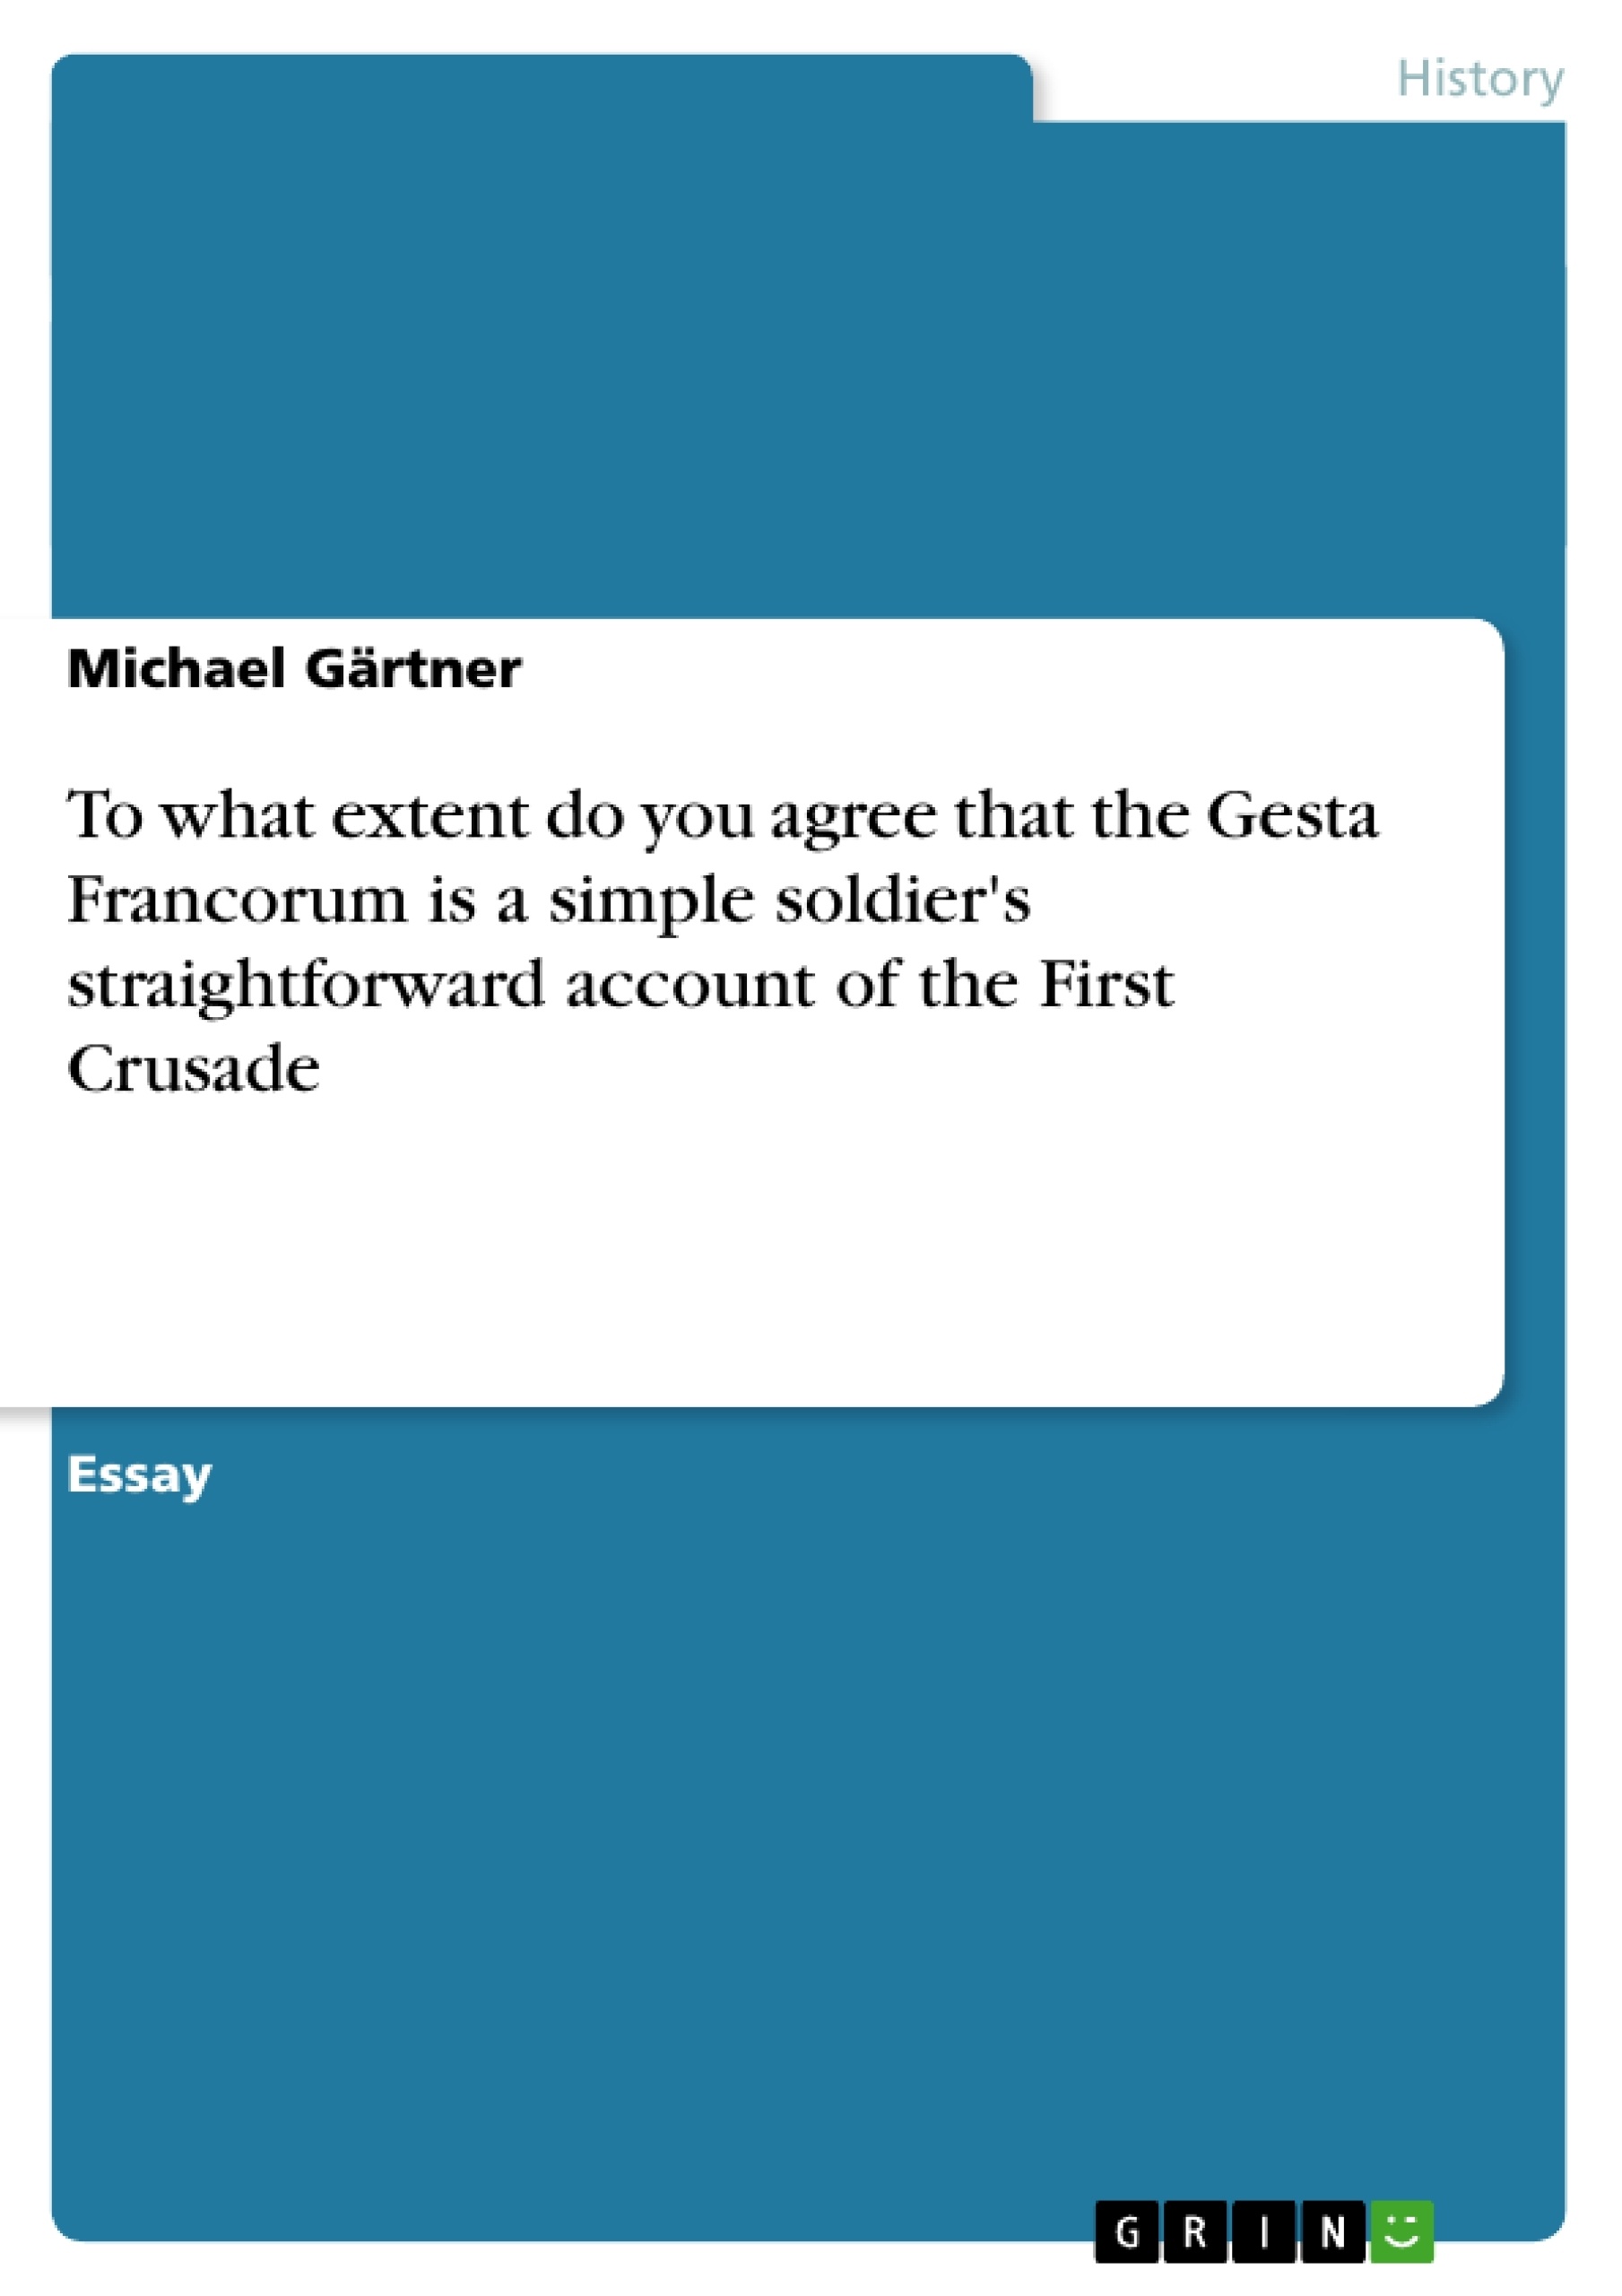 Titel: To what extent do you agree that the Gesta Francorum is a simple soldier's straightforward account of the First Crusade